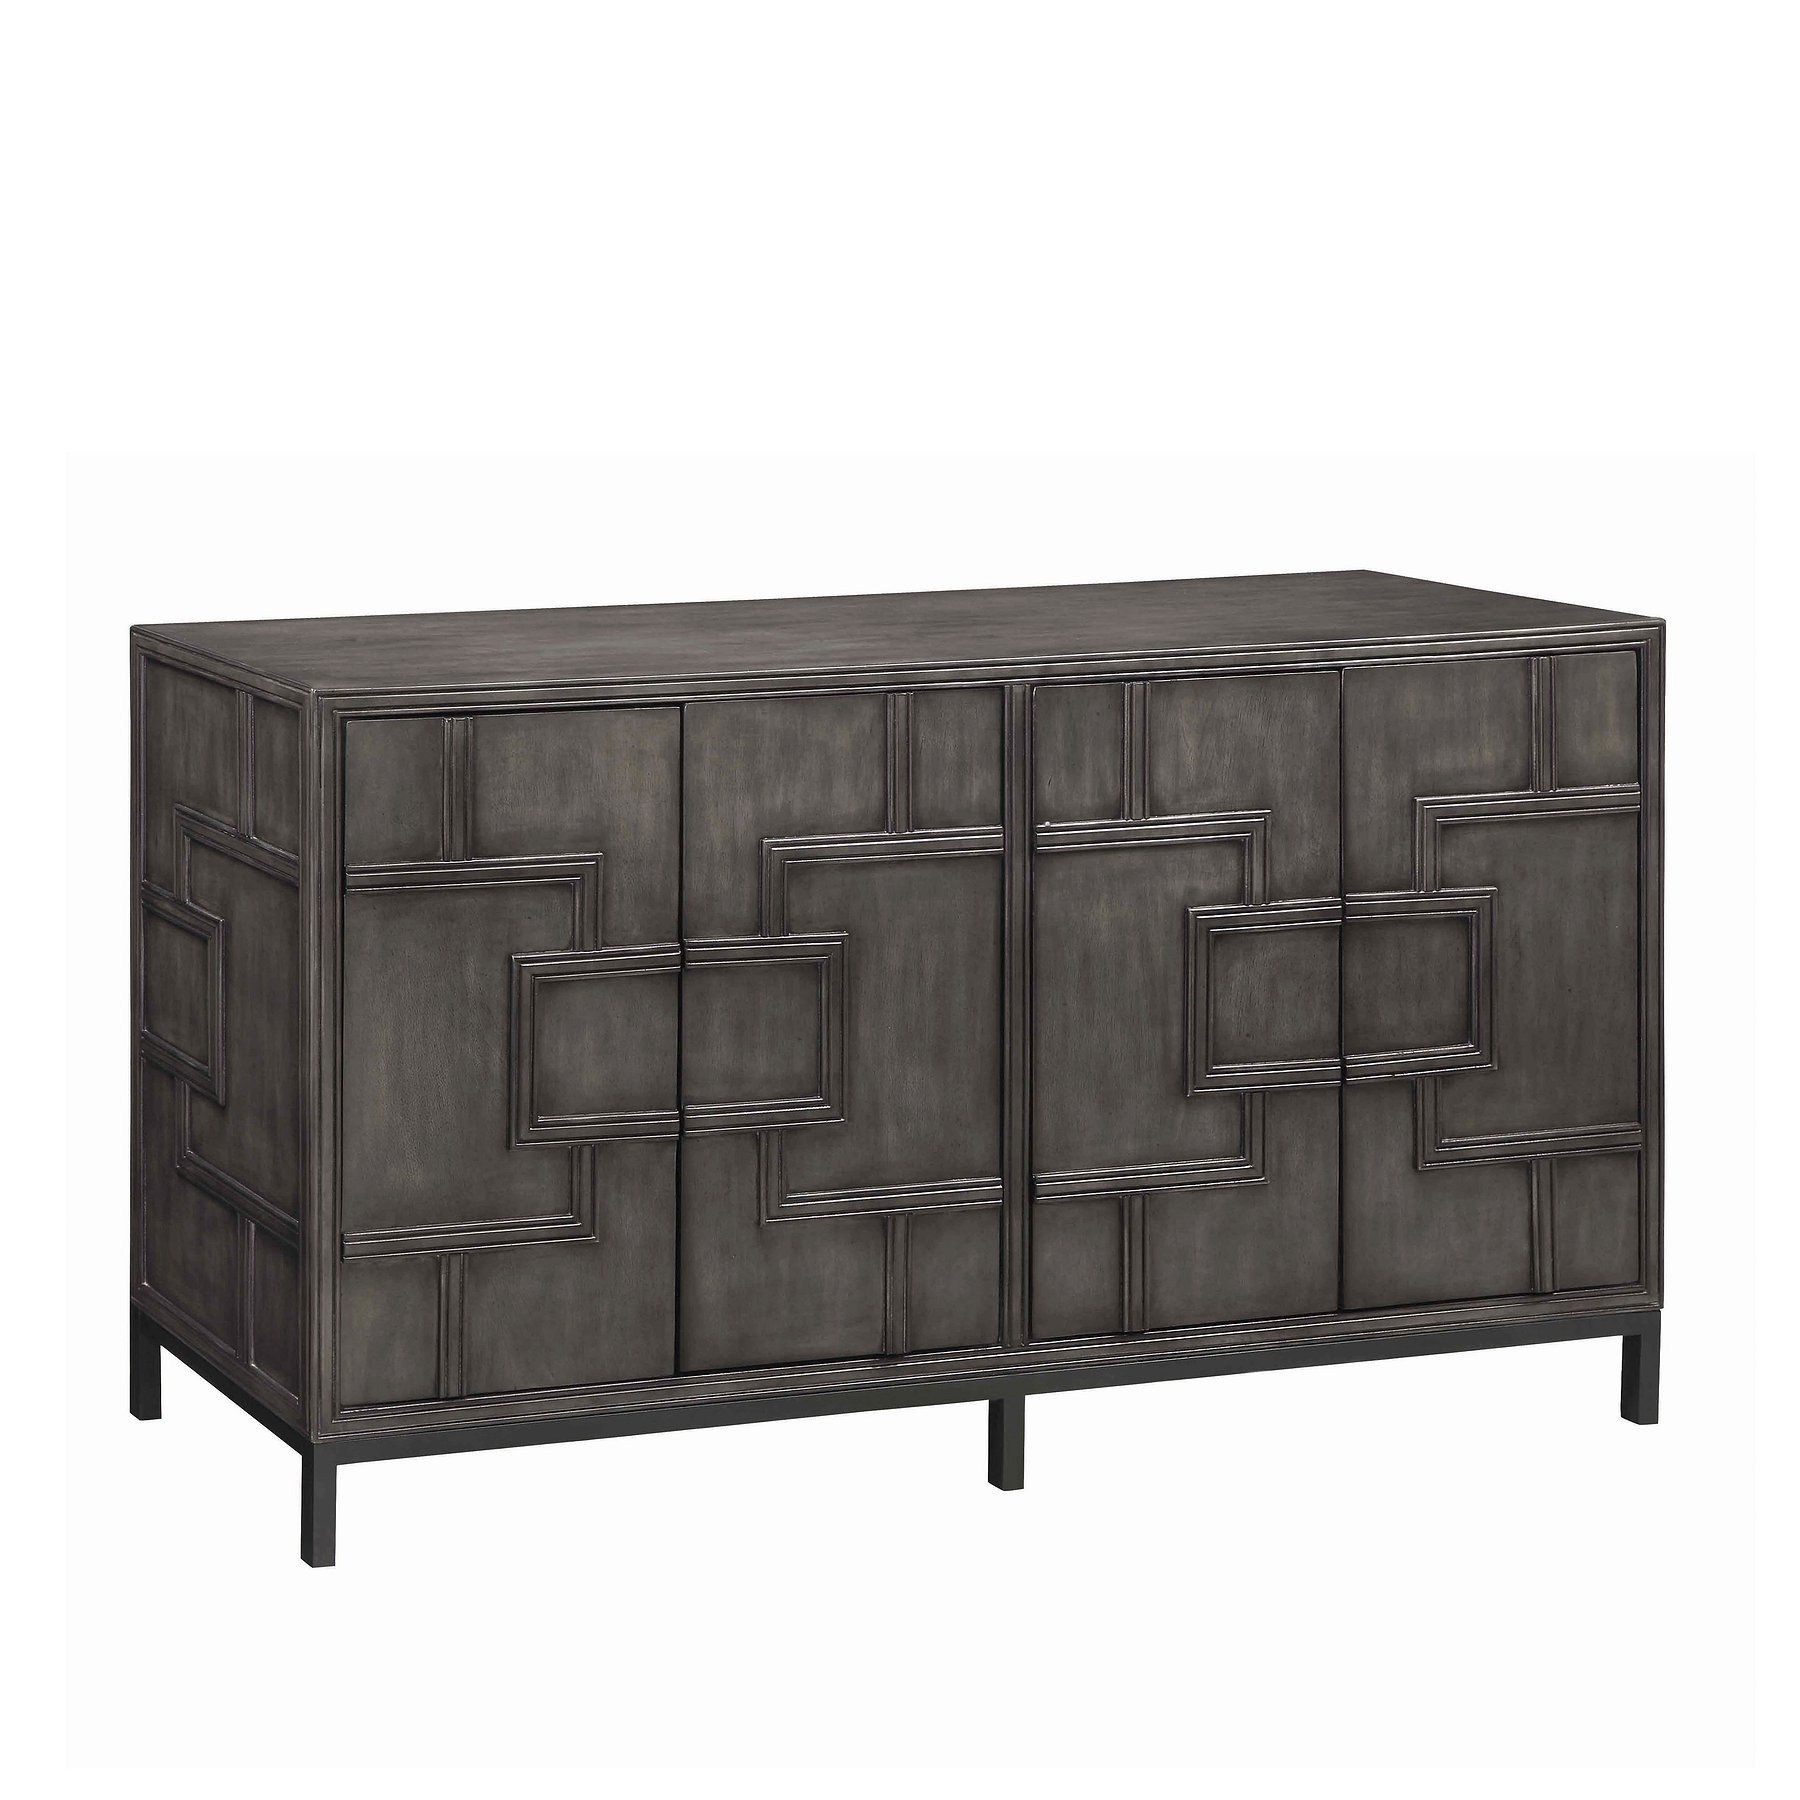 13613 Credenza In Geometric Shapes Credenzas (View 7 of 30)